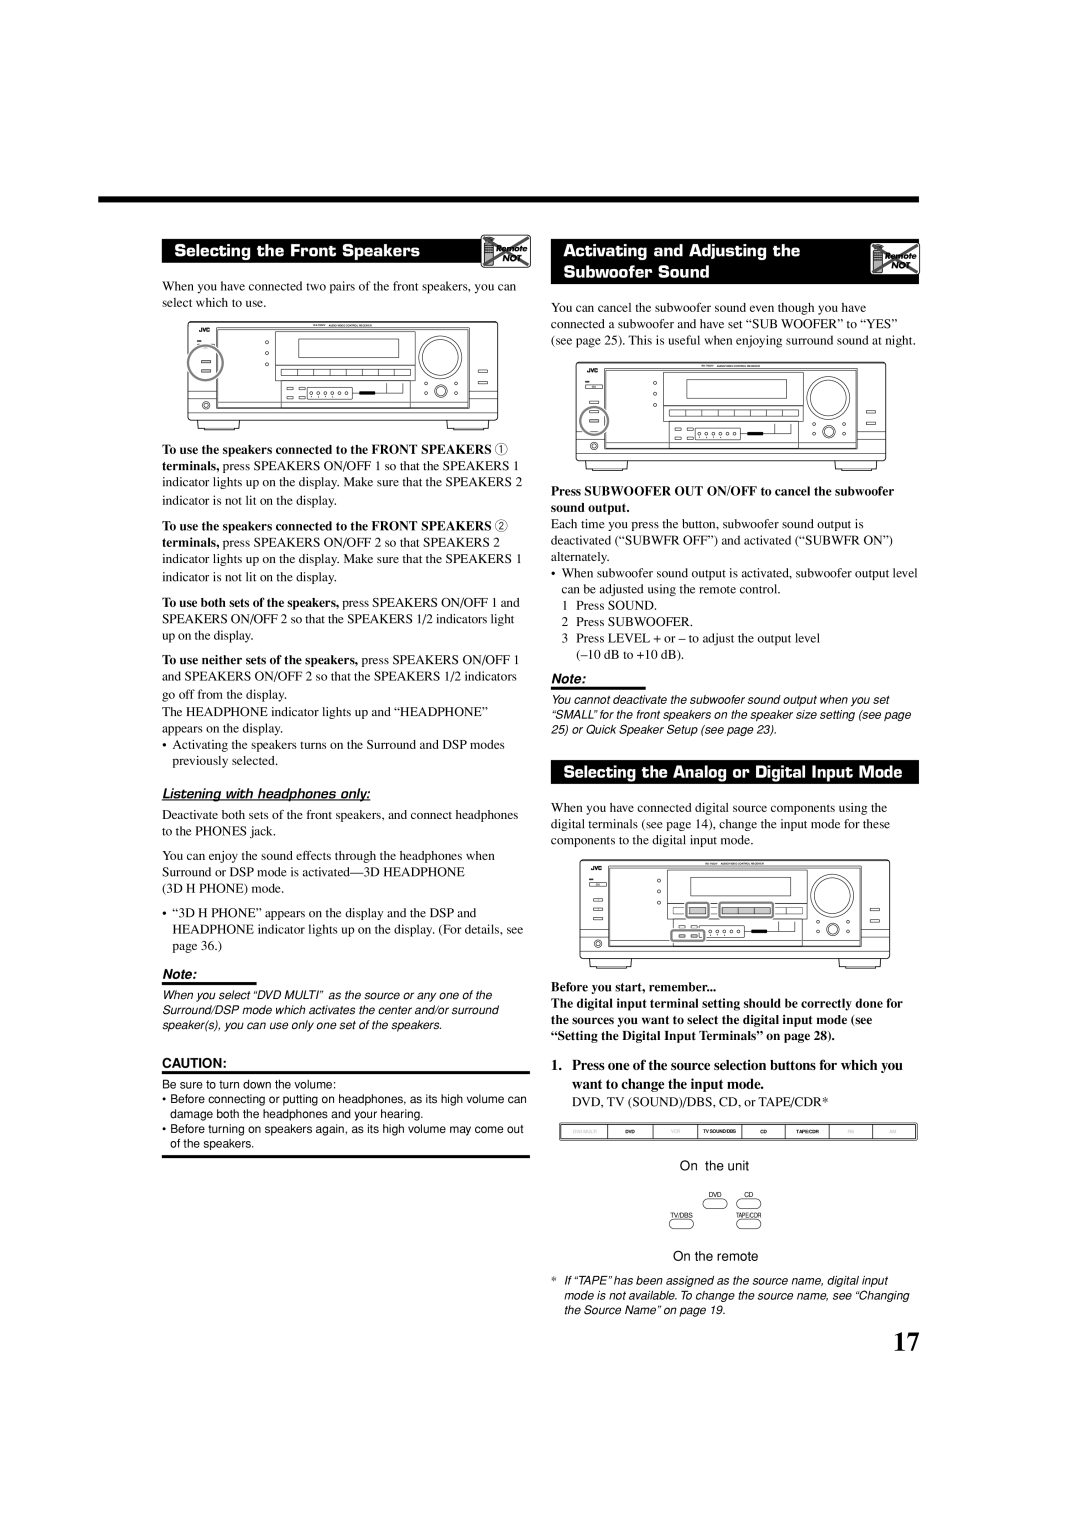 JVC LVT1007-010A[A] manual Selecting the Front Speakers, Activating and Adjusting the, Subwoofer Sound 